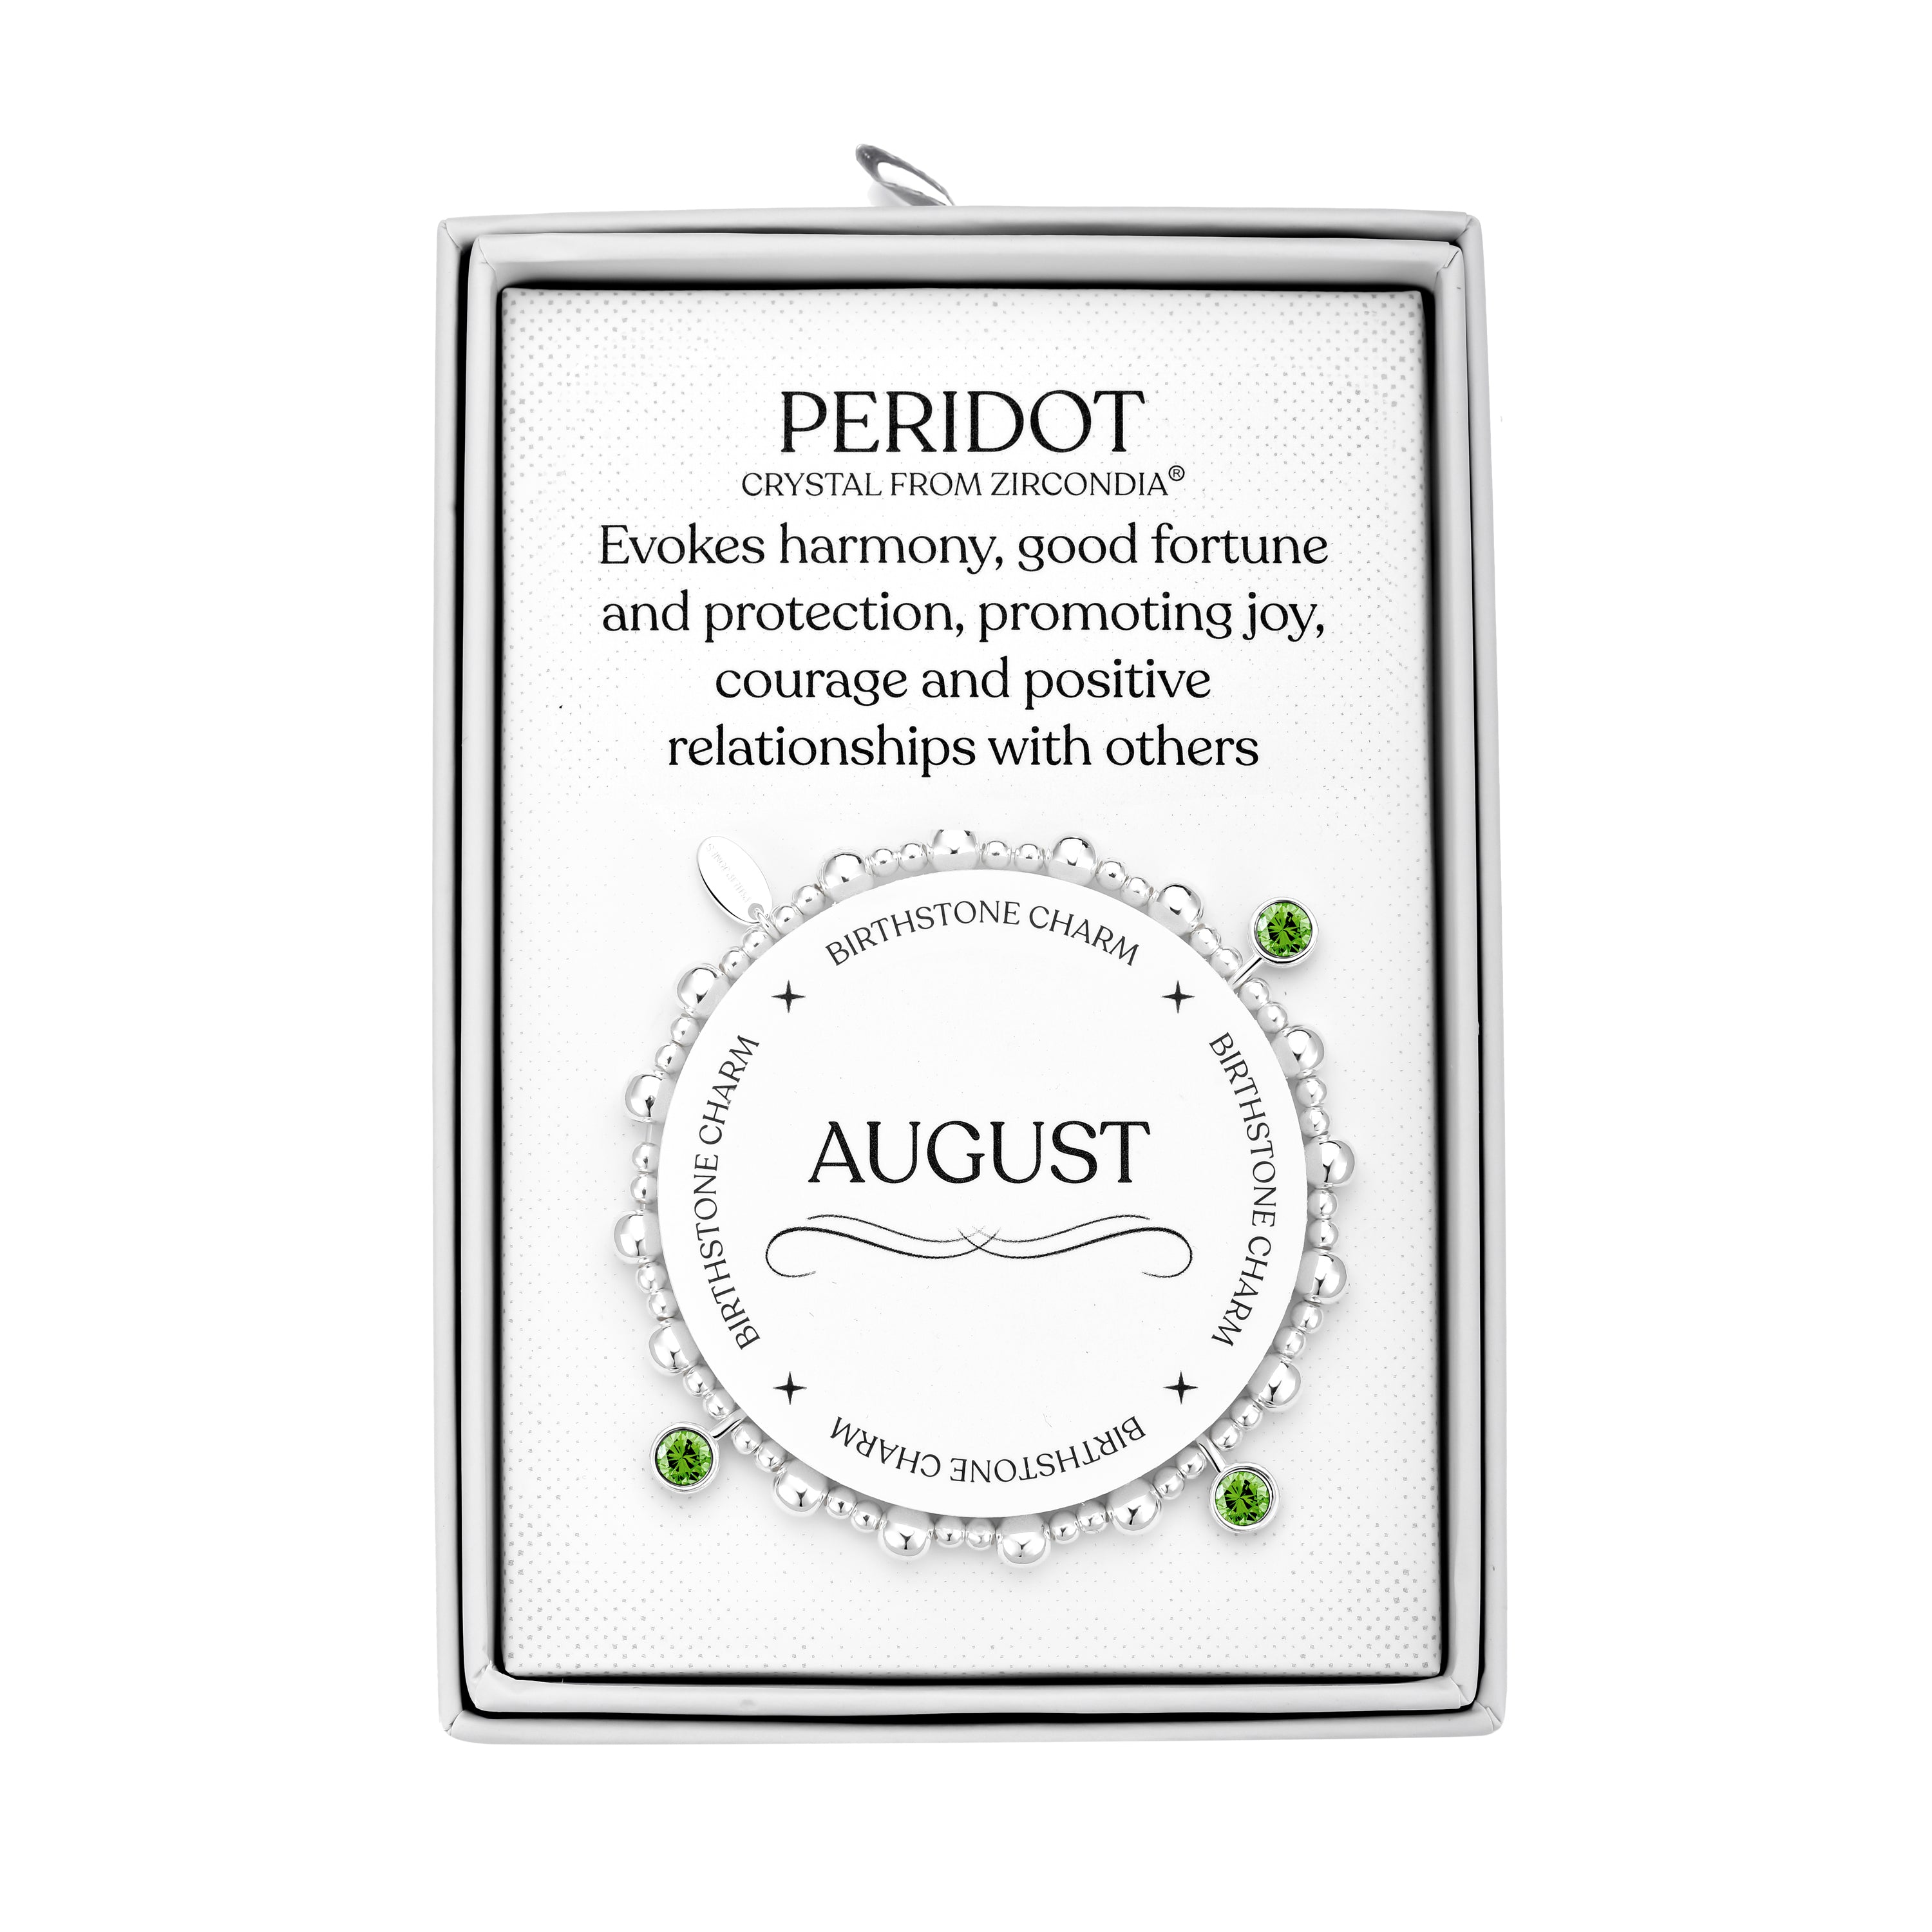 August (Peridot) Birthstone Stretch Charm Bracelet with Quote Gift Box by Philip Jones Jewellery